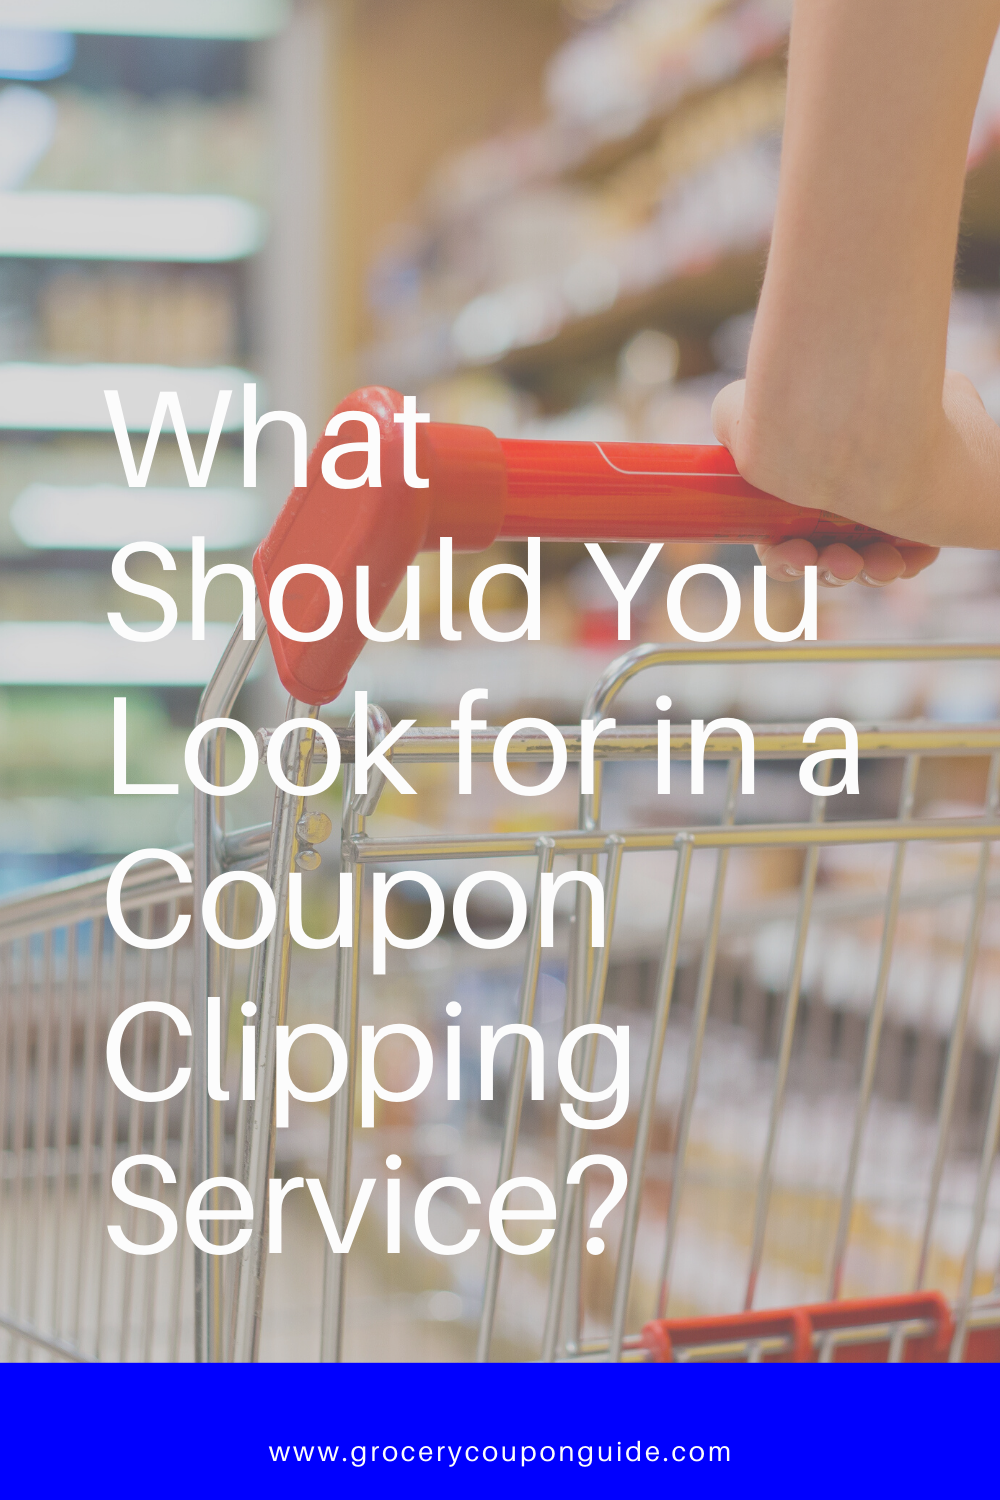 What Should You Look for in a Coupon Clipping Service